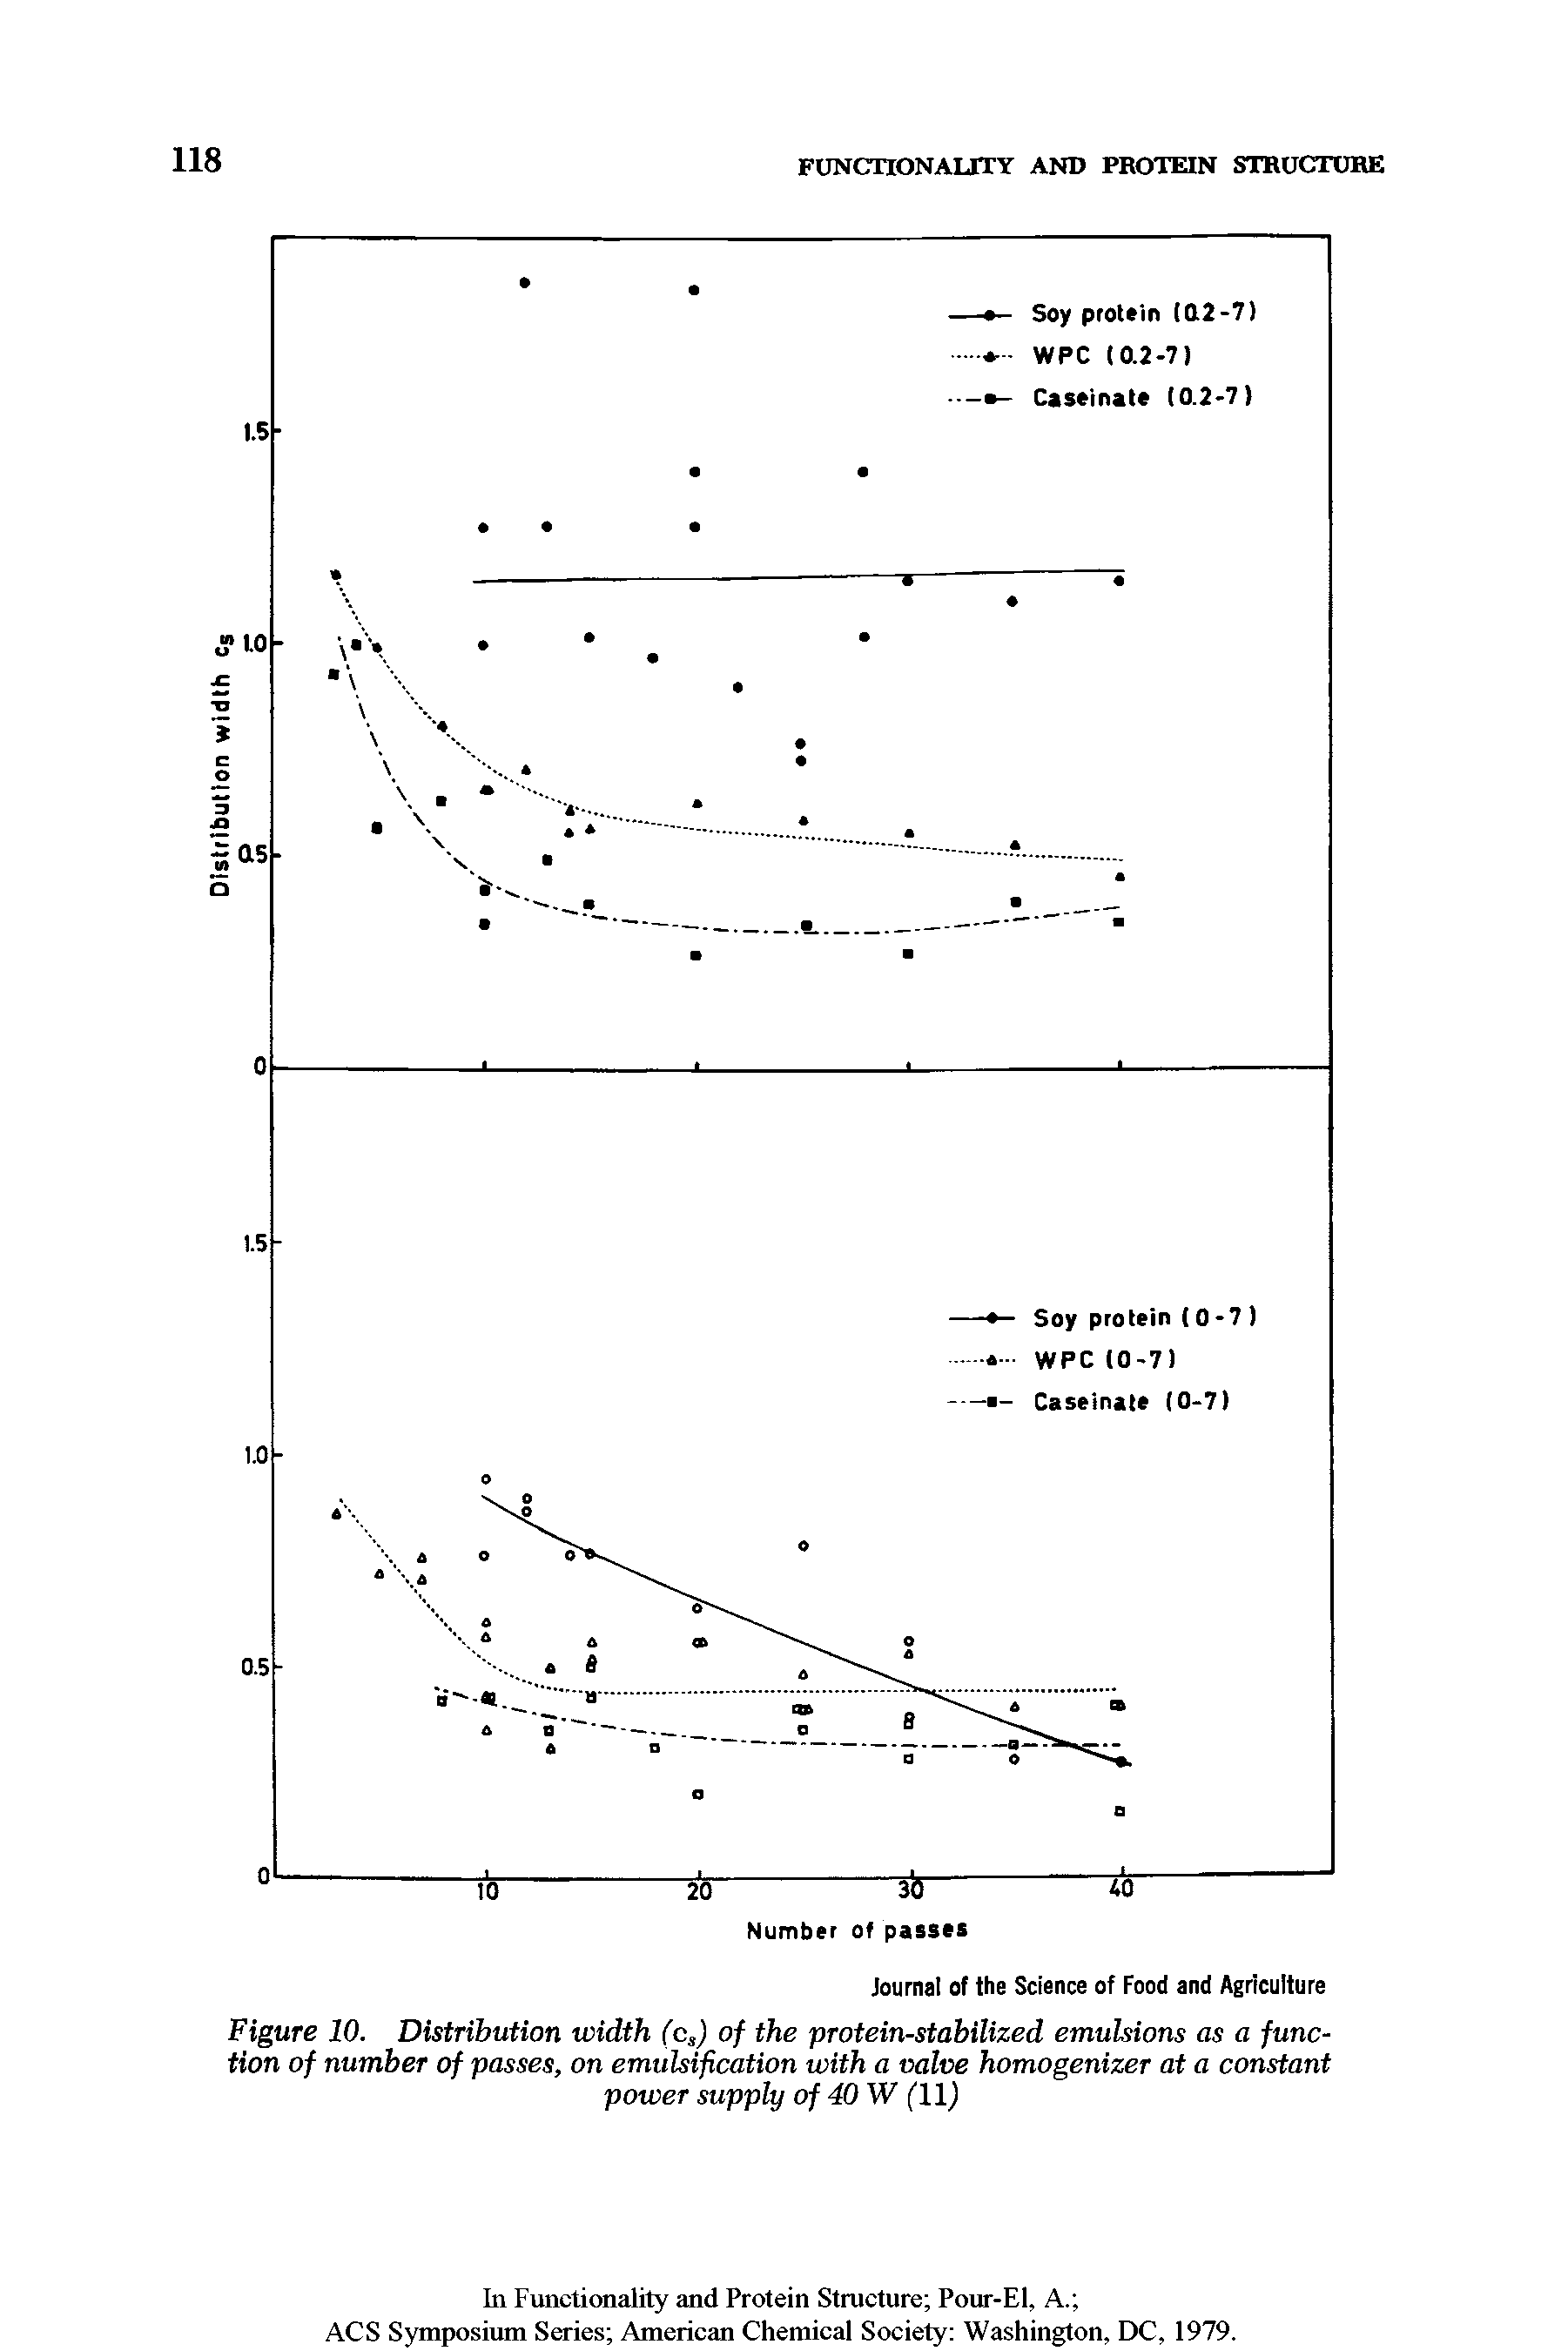 Figure 10. Distribution width (cs) of the protein-stabilized emulsions as a function of number of passes, on emulsification with a valve homogenizer at a constant power supply of 40 W (11)...